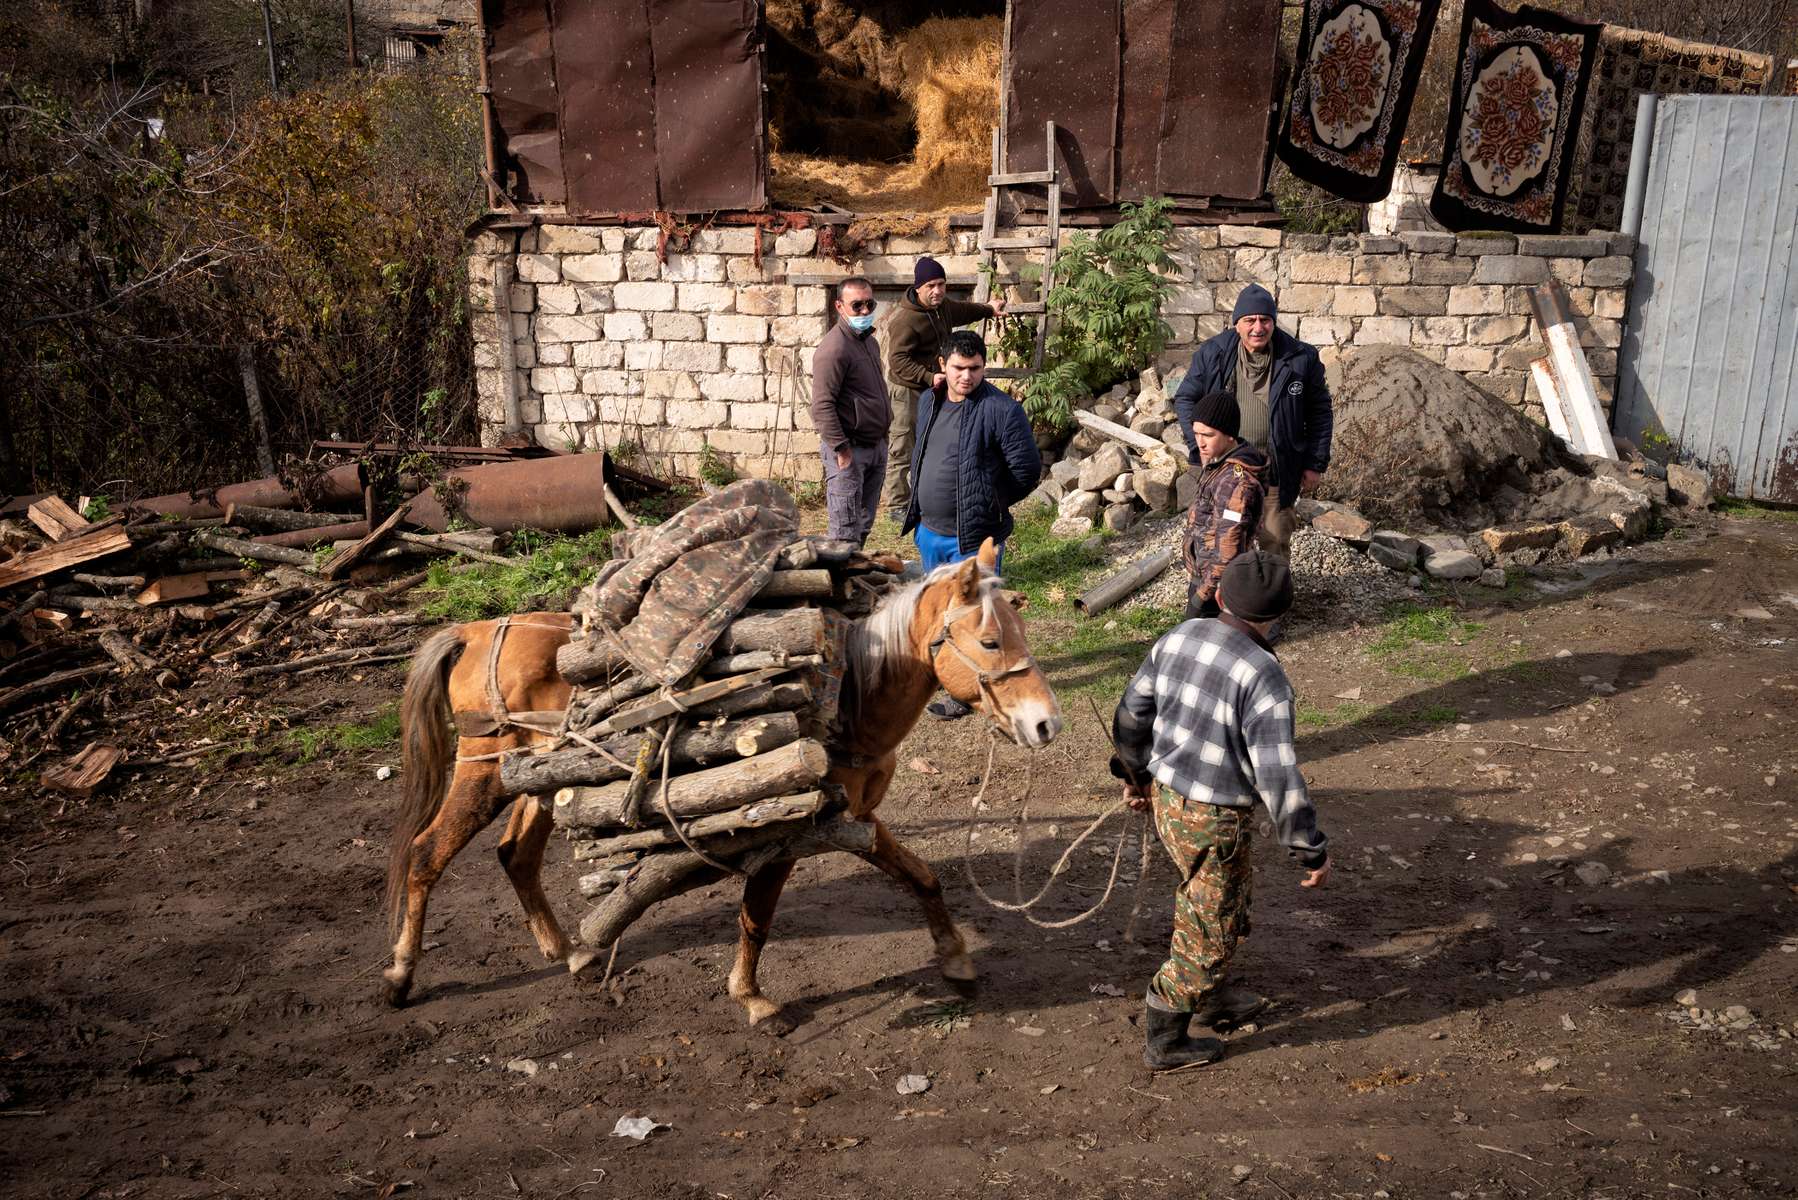 A man leading a donkey cart through Aygestan village, passes the explosive ordnance disposal team from the HALO Trust, who are beginning the laborious process of removing the dangerous explosives, including warheads, rockets, and fuses, that were strewn across the village, when a nearby ammunition storehouse was hit early on in the war. 